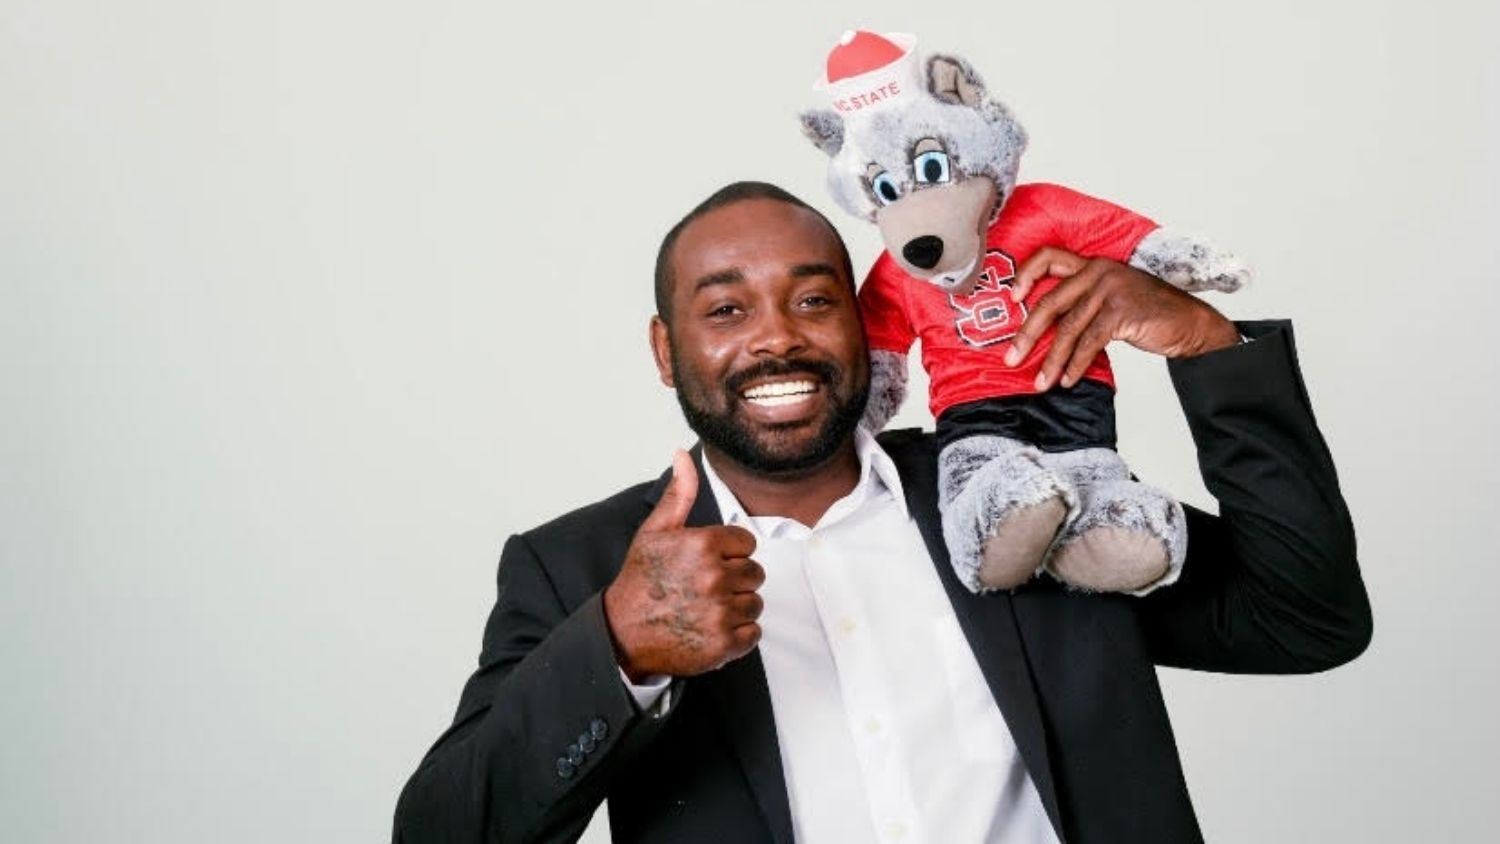 Rashawn King with NC State wolf stuffed animal on shoulder - Celebrating Black Excellence: Rayshwn King is Promoting Parks and Recreation - Parks Recreation and Tourism Management NC State University